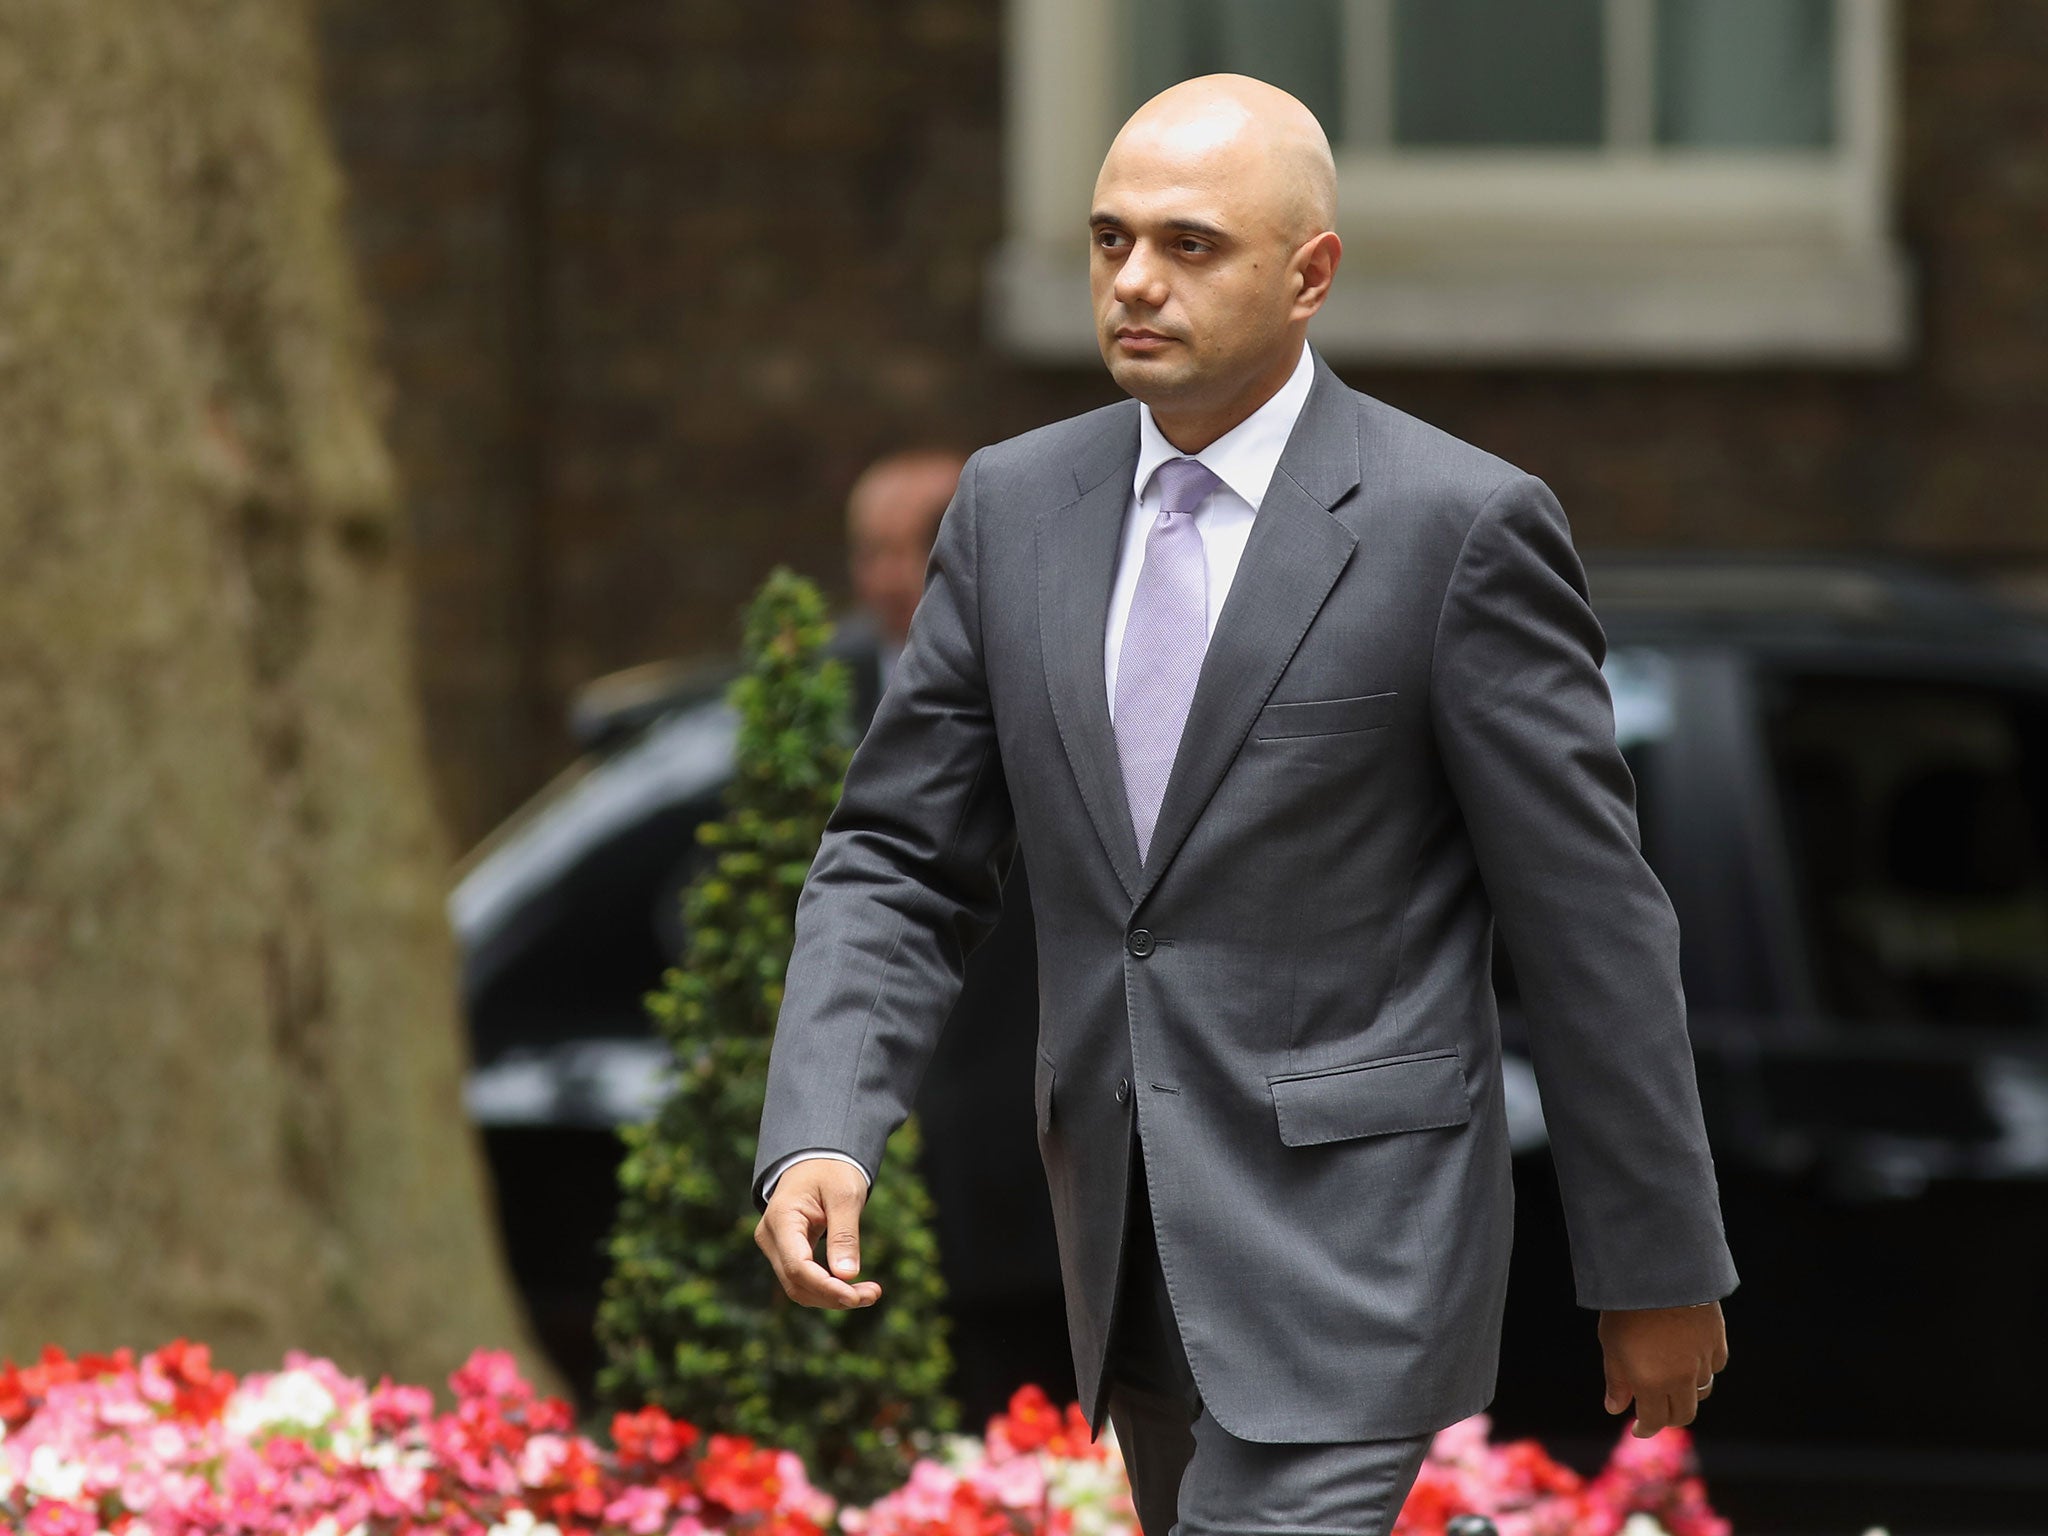 Sajid Javid said it was impossible for people to play a ‘positive role’ in public life unless they accepted democracy and equality